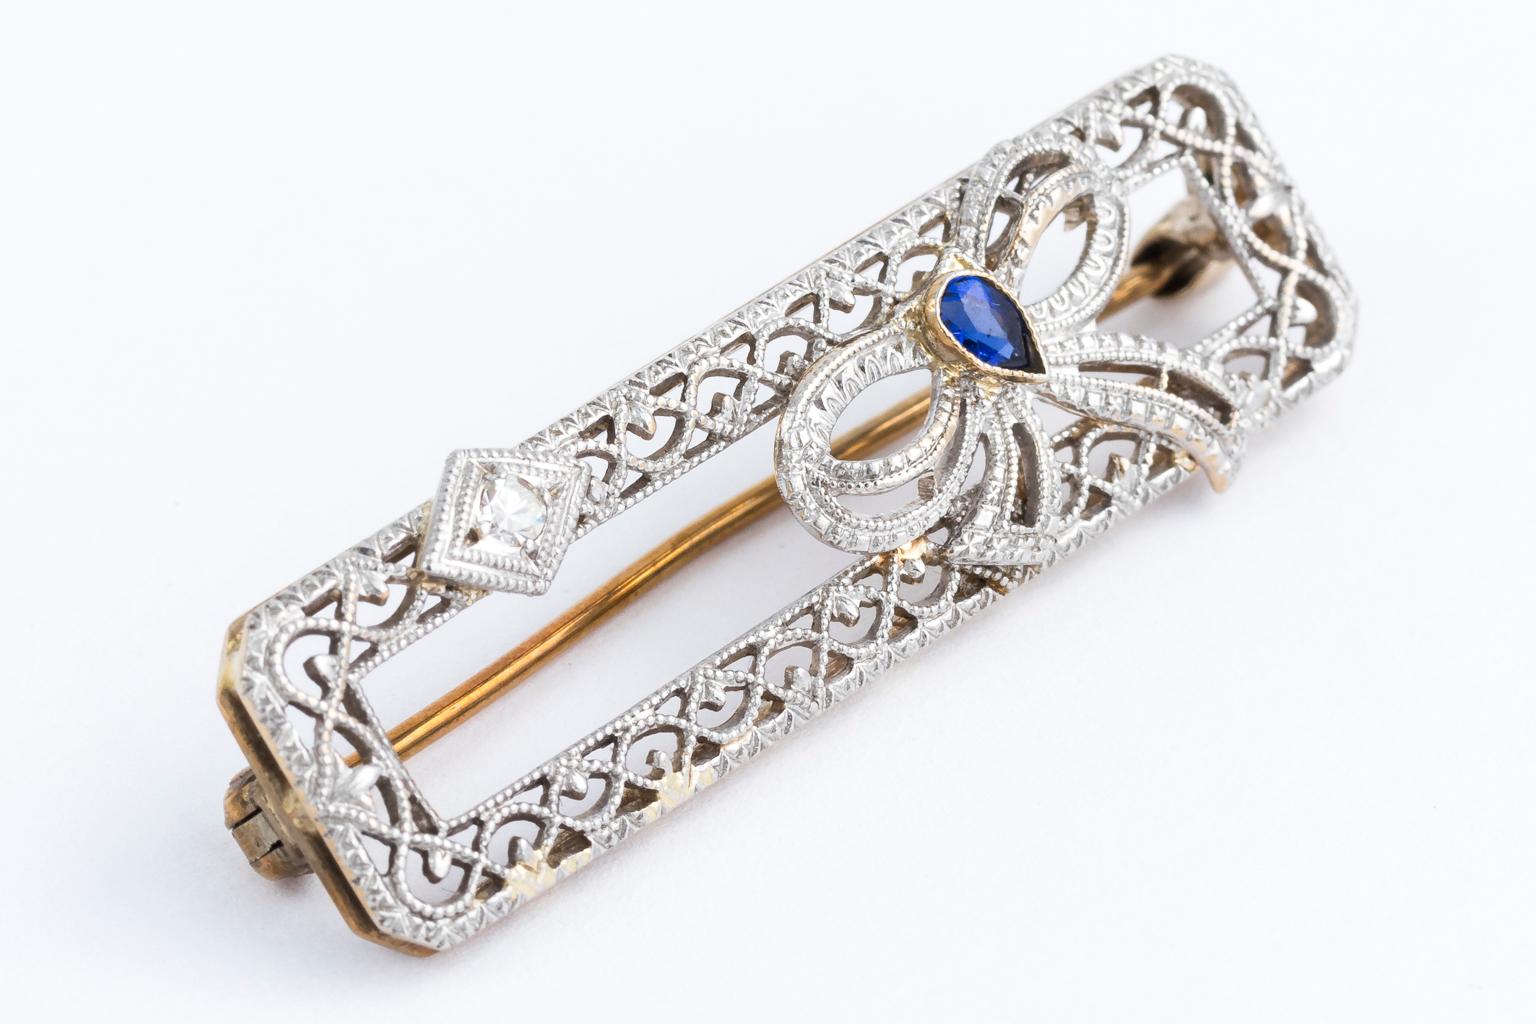 Circa 1920s 14 karat diamond and sapphire pin. This pin features 14 karat yellow gold bottom with a white rhodiwined top.* It has one small pear shaped sapphire and one small diamond with latticework detail. Total weight 3.50 grams.
